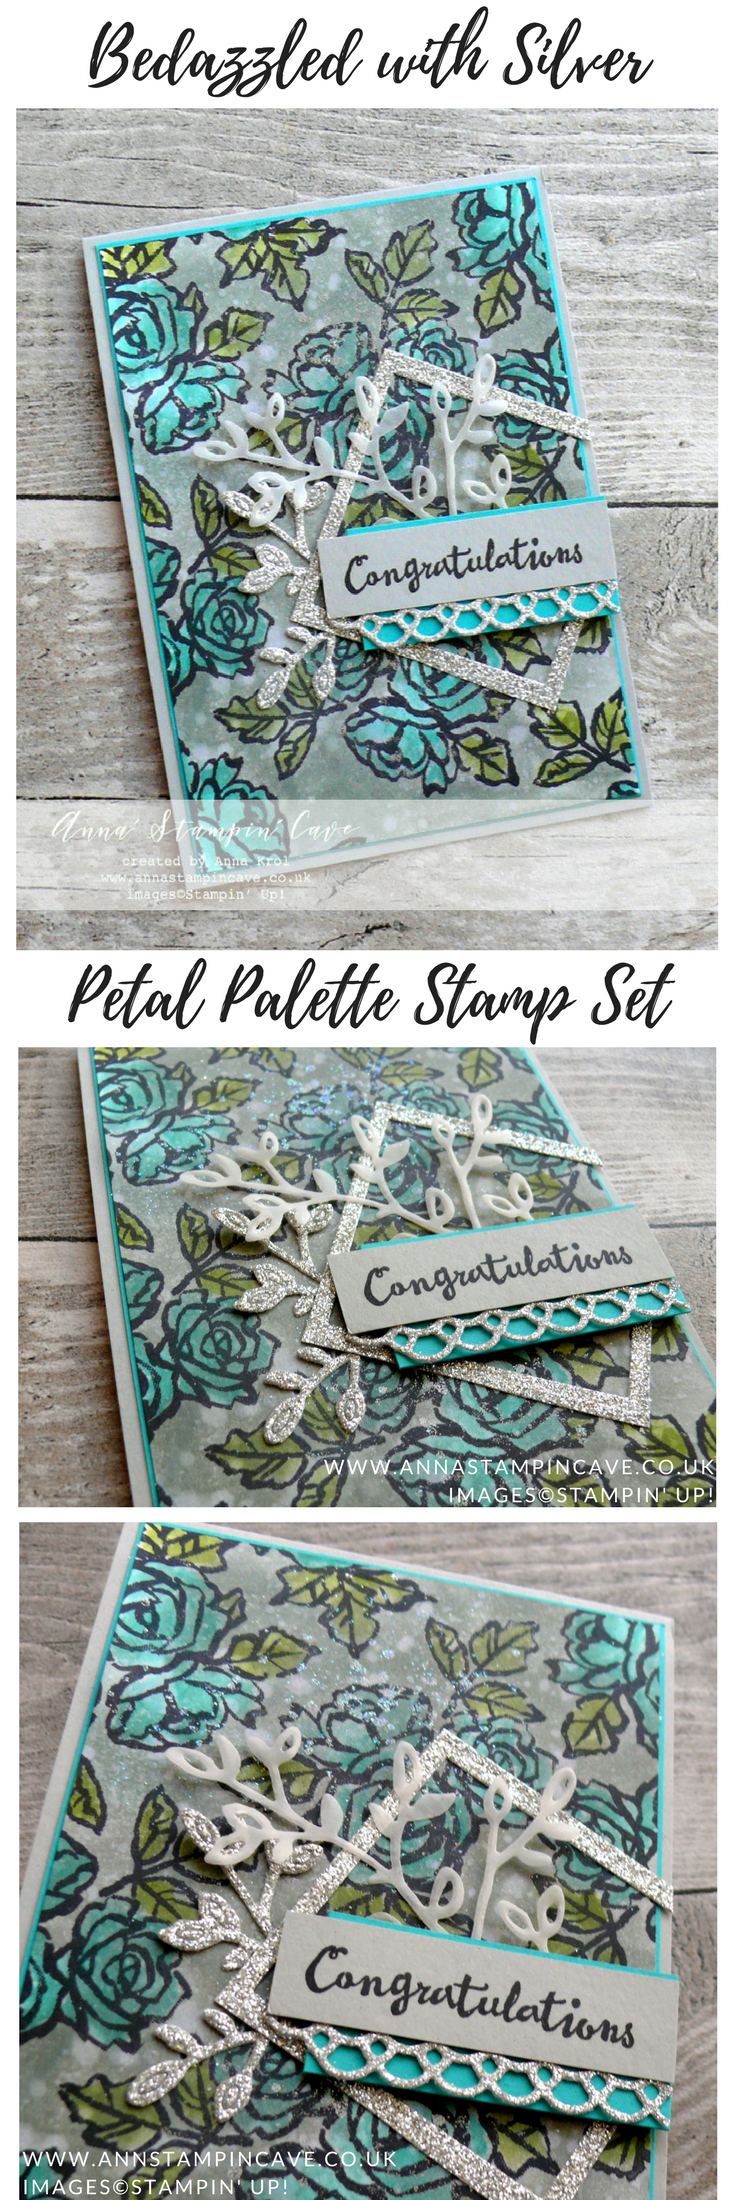 Anna' Stampin' Cave - Stampin' Up! Petal Palette Stamp Set and Petals & More Thinlits Dies - Bedazzled with Silver